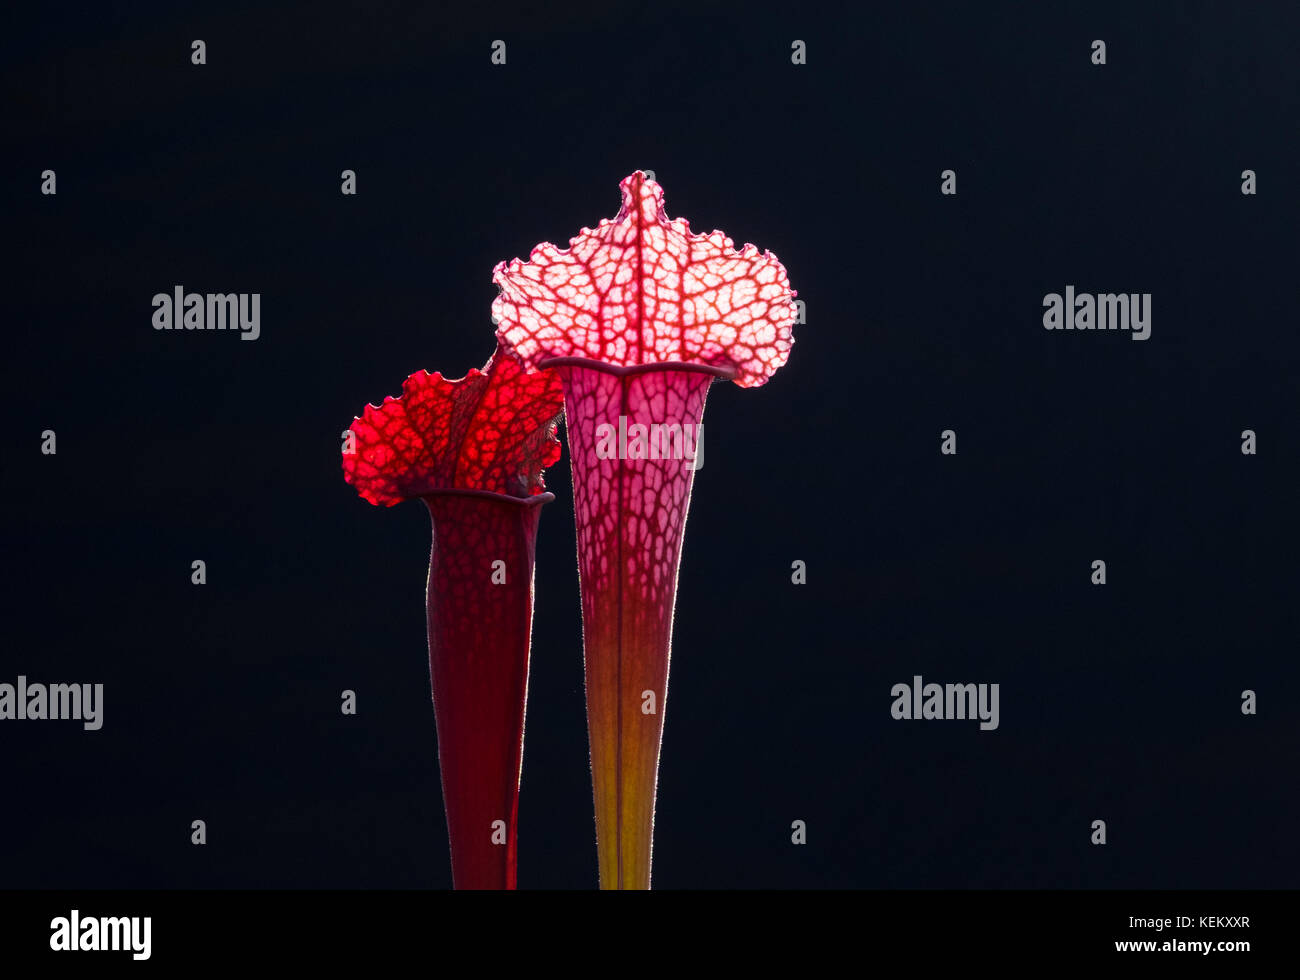 sarracenia, the pitcher plant, which devours insect by luring them into their tube shaped leaves. Stock Photo